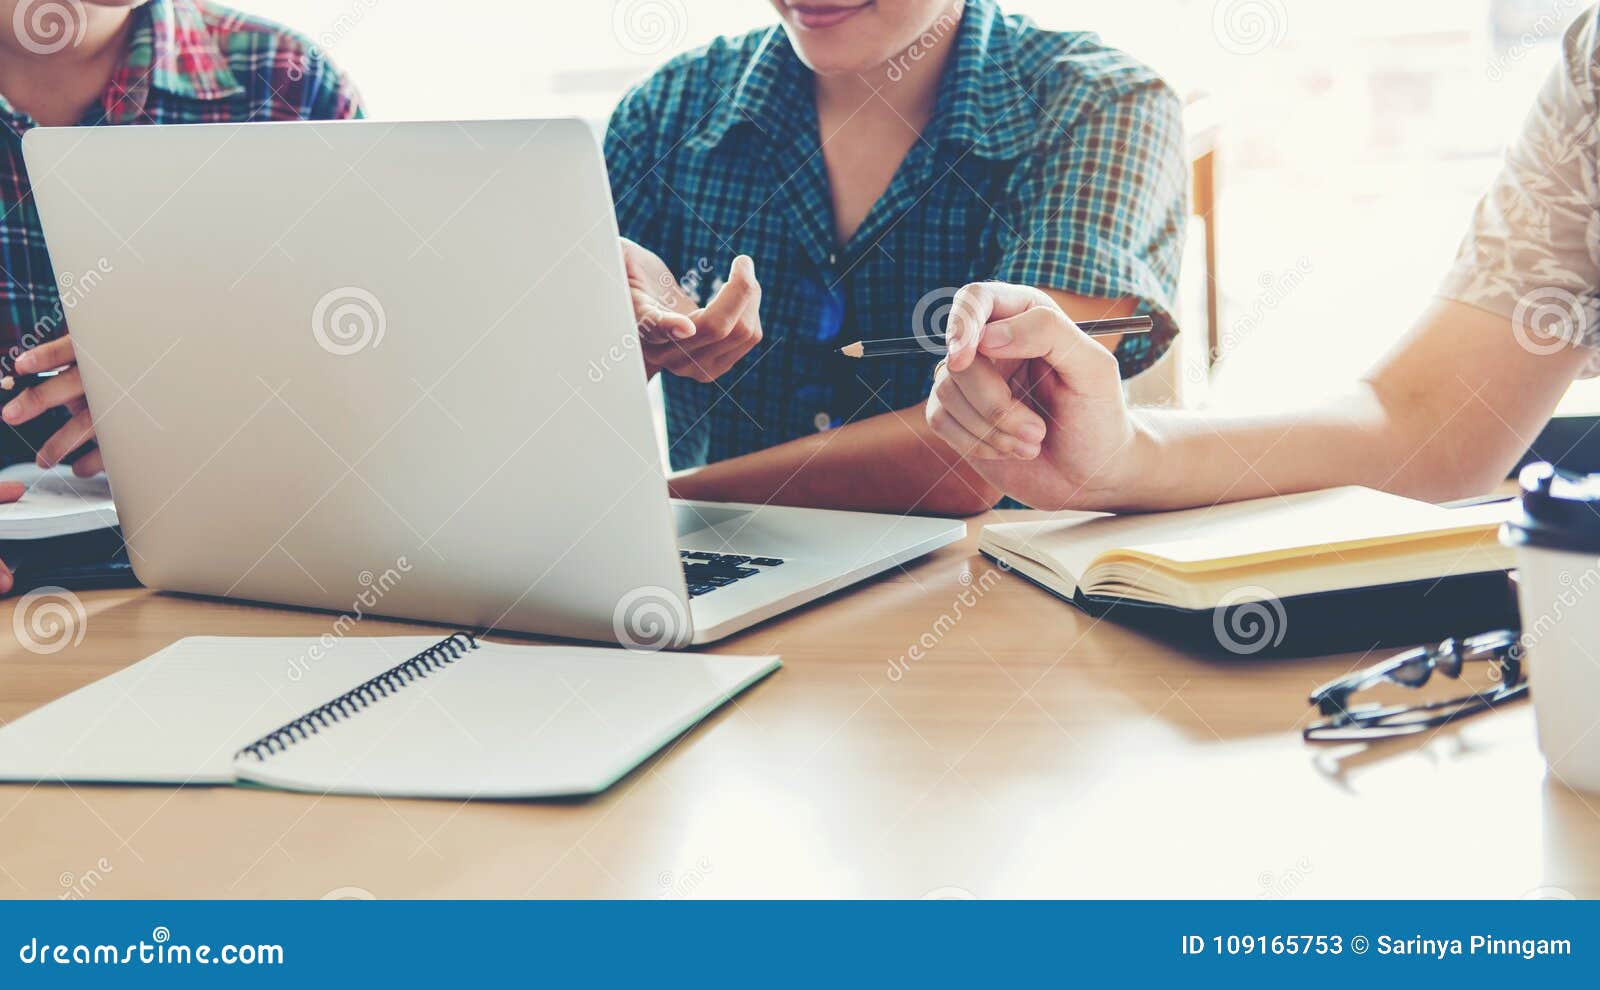 university students using laptop meeting for research homework i